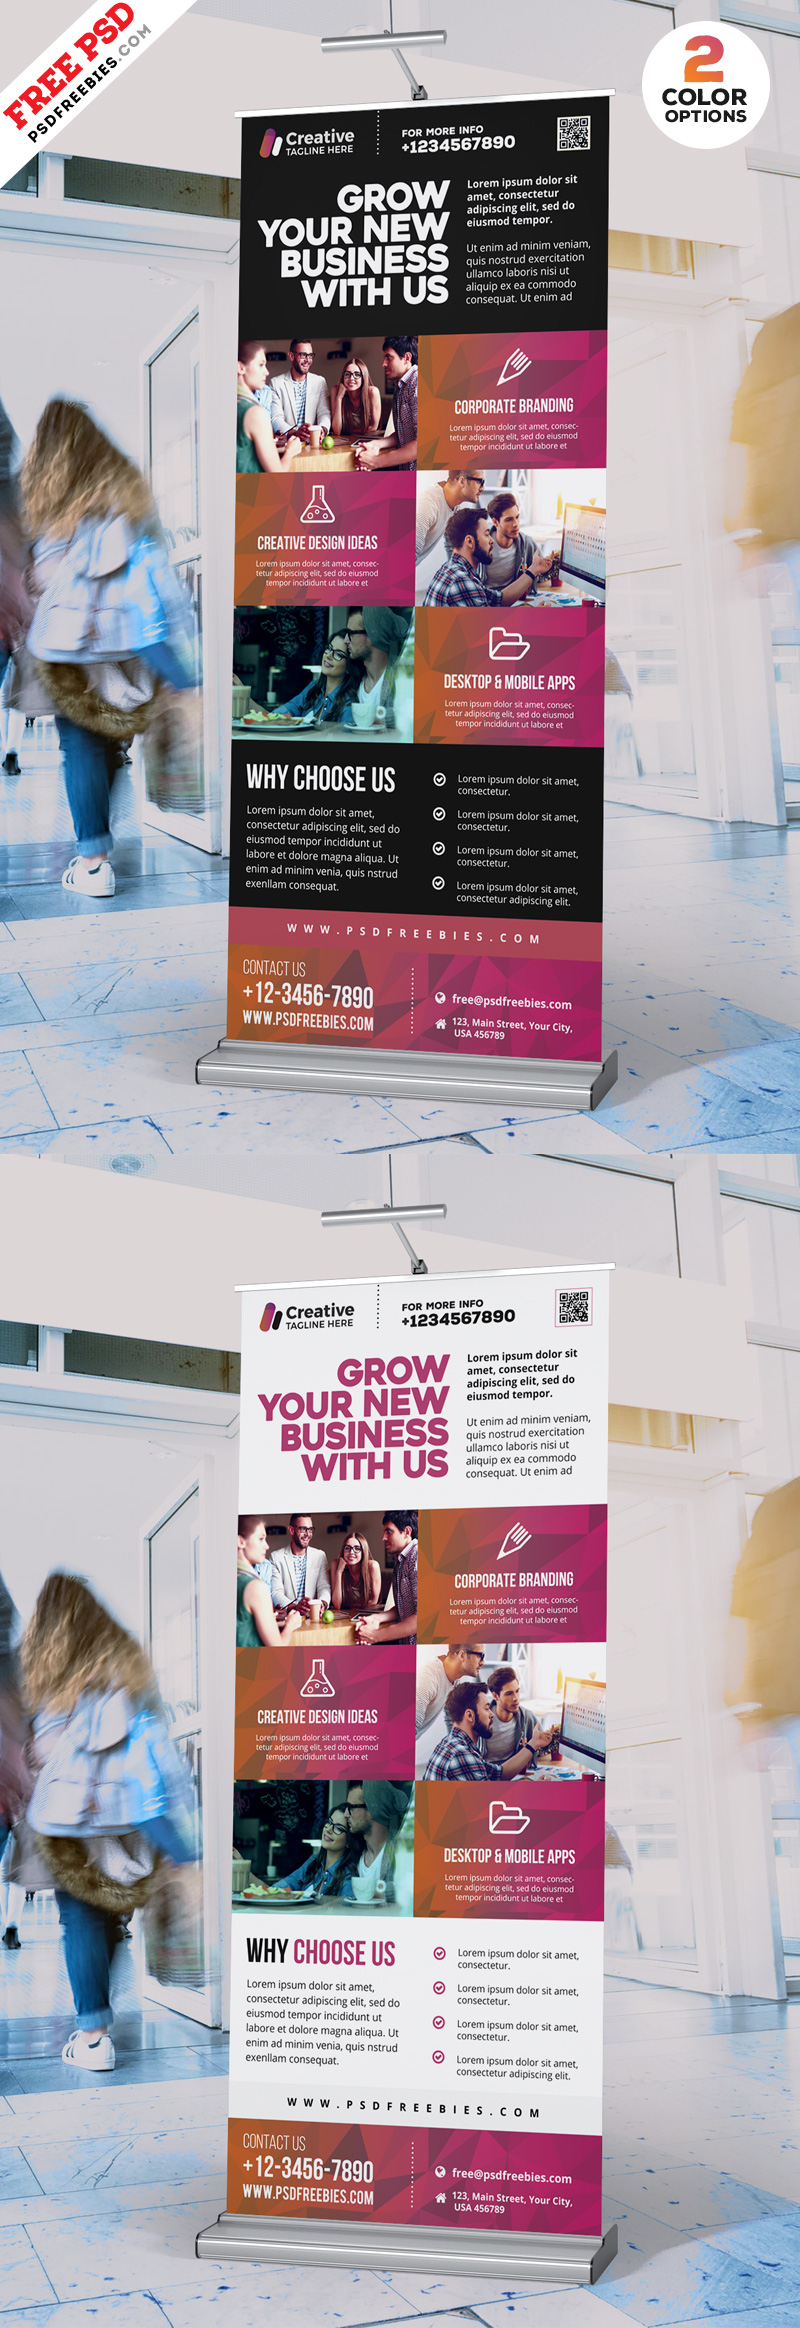 Outdoor Advertising Roll-up Banner Bundle PSD Free DownloadOutdoor Advertising Roll-up Banner Bundle PSD Free Download